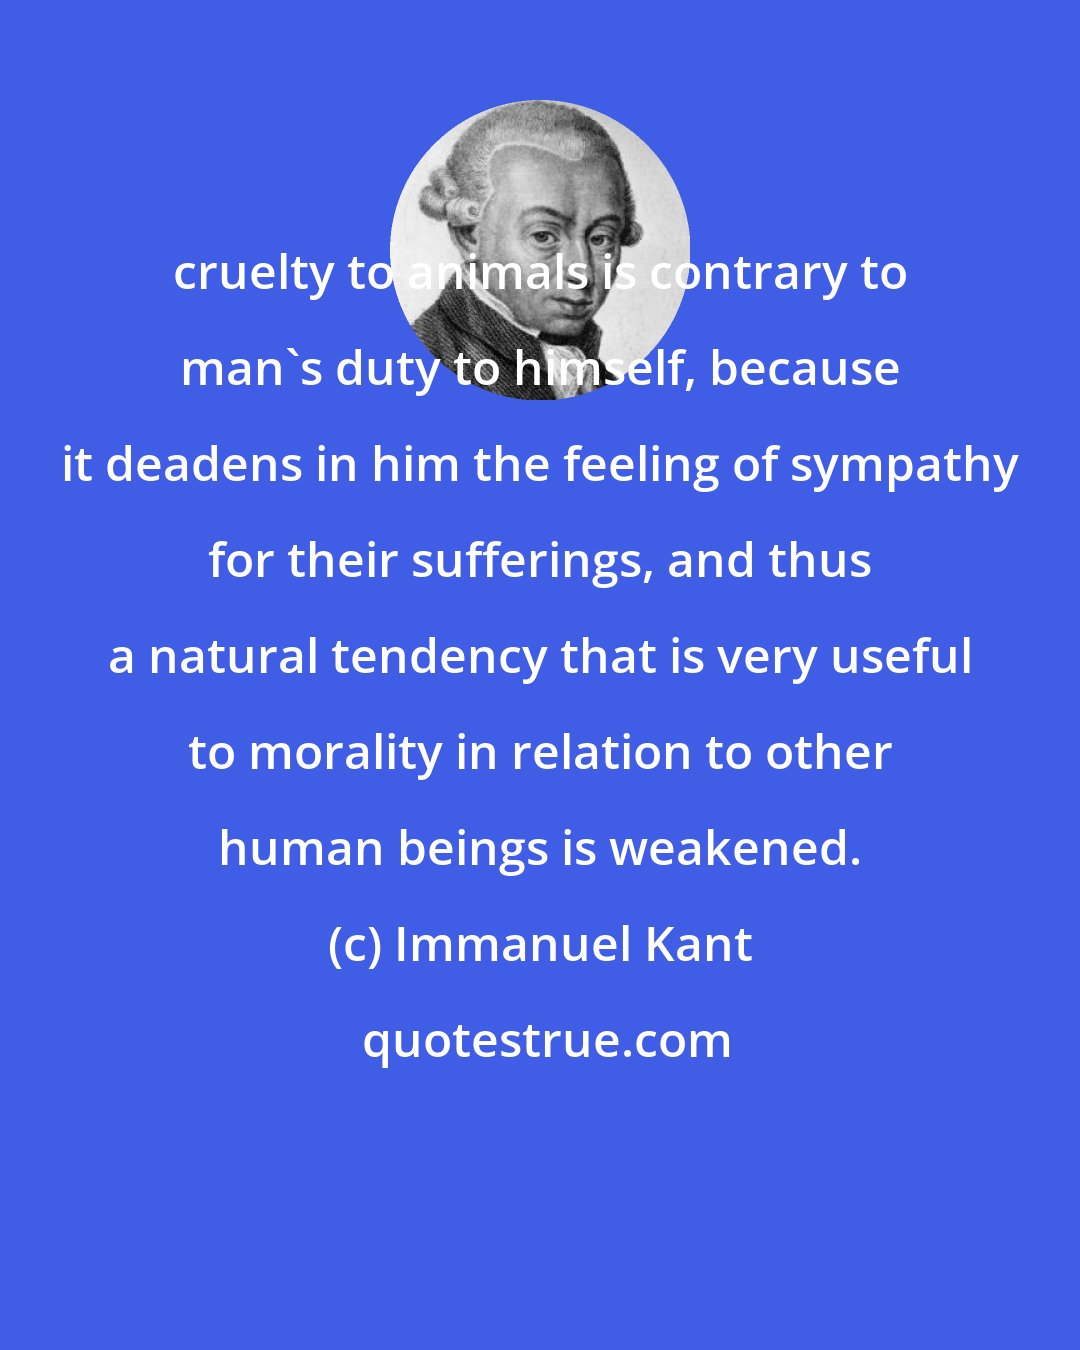 Immanuel Kant: cruelty to animals is contrary to man's duty to himself, because it deadens in him the feeling of sympathy for their sufferings, and thus a natural tendency that is very useful to morality in relation to other human beings is weakened.